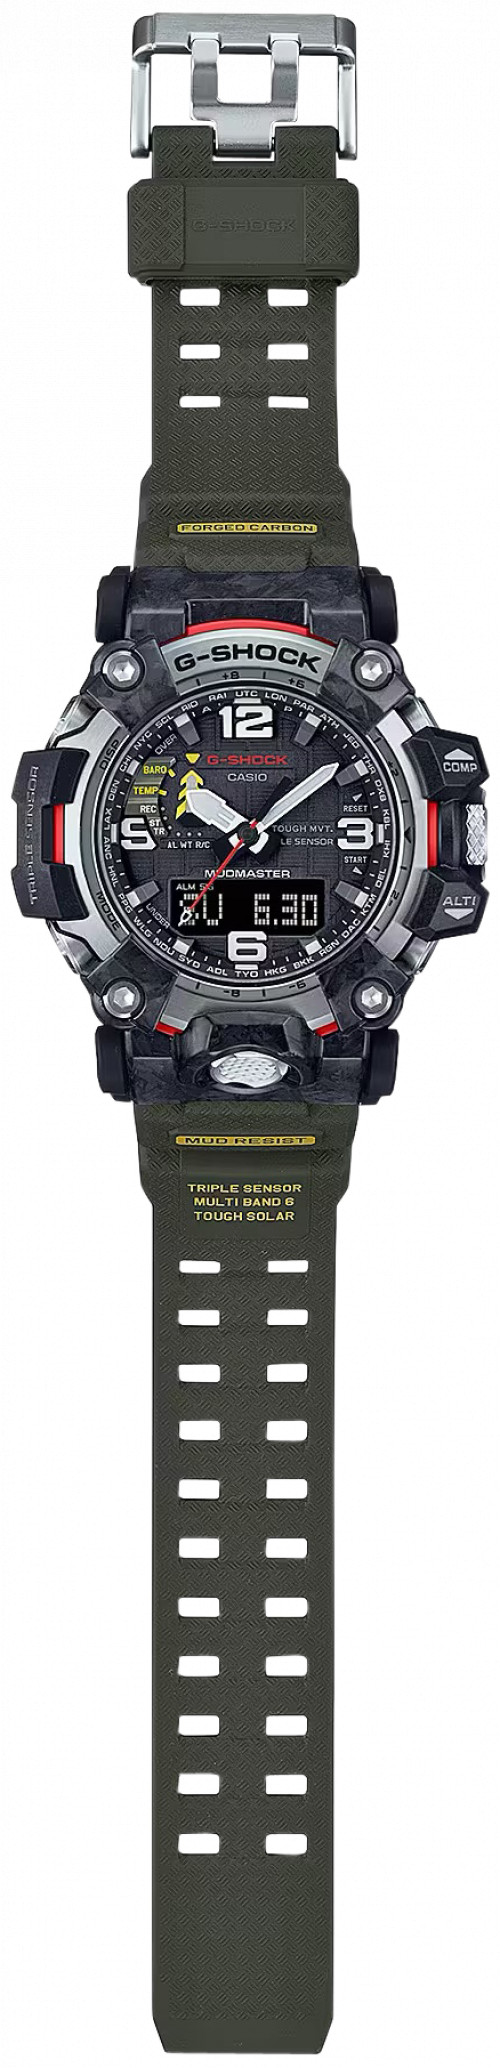 G-shock/vlc Distribution GWG20001A3 G-Shock Tactical MudMaster Keep Time Green Features Digital Compass